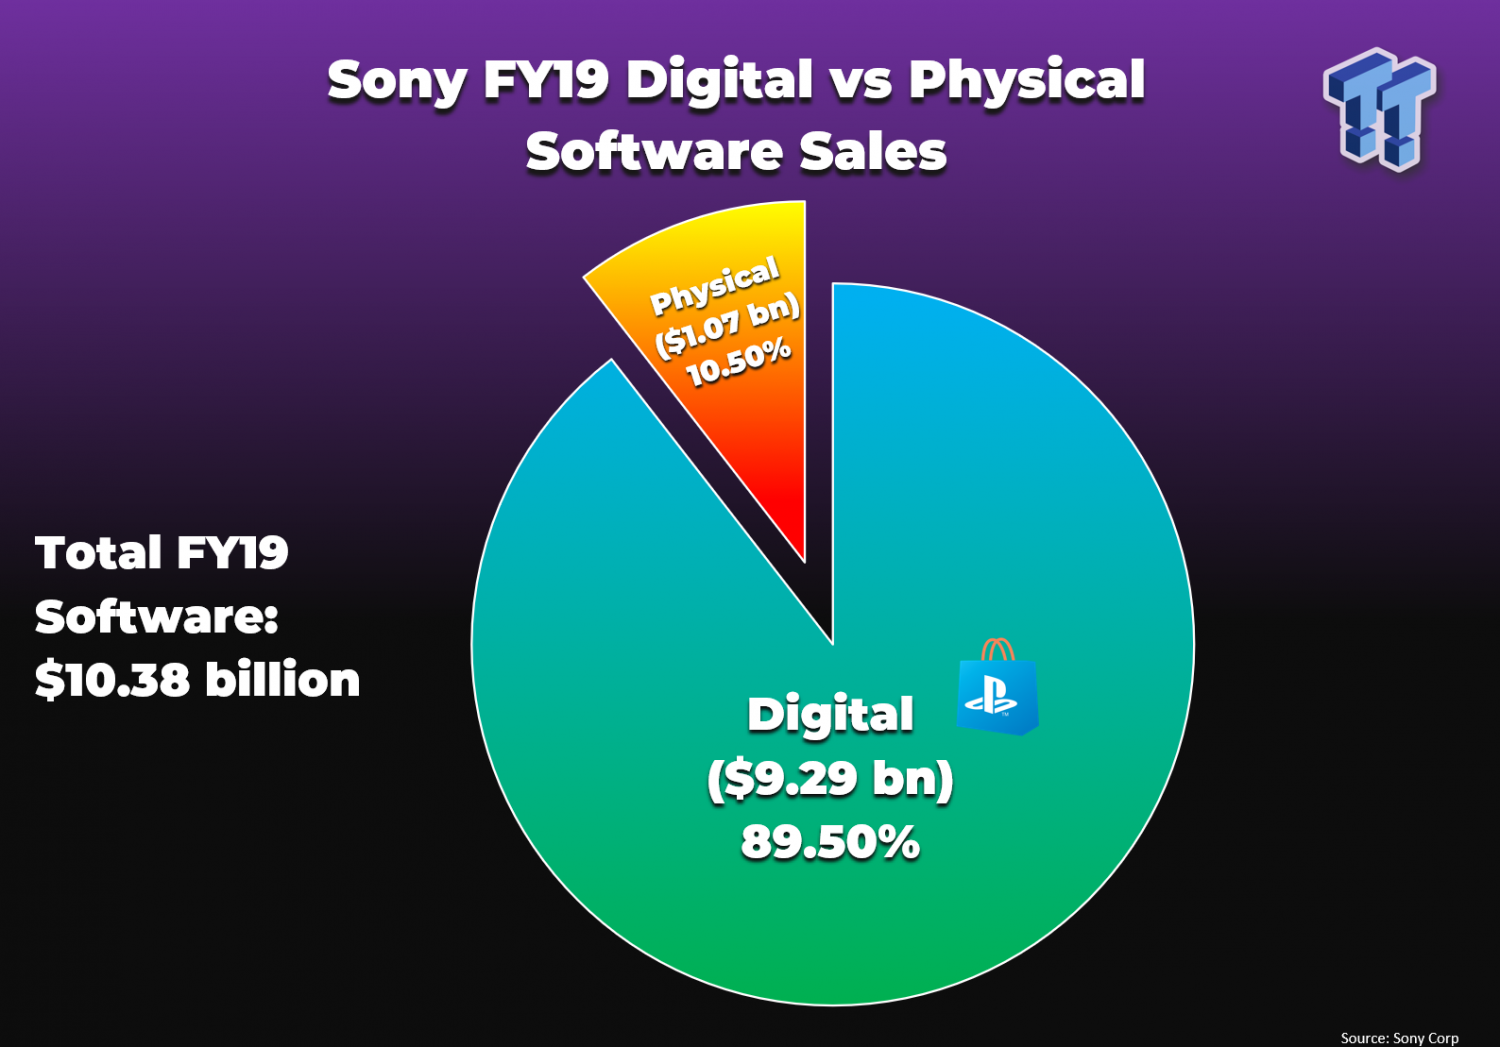 PlayStation Now Use Contributed to Sony's 19% Increase in 2018 Sales